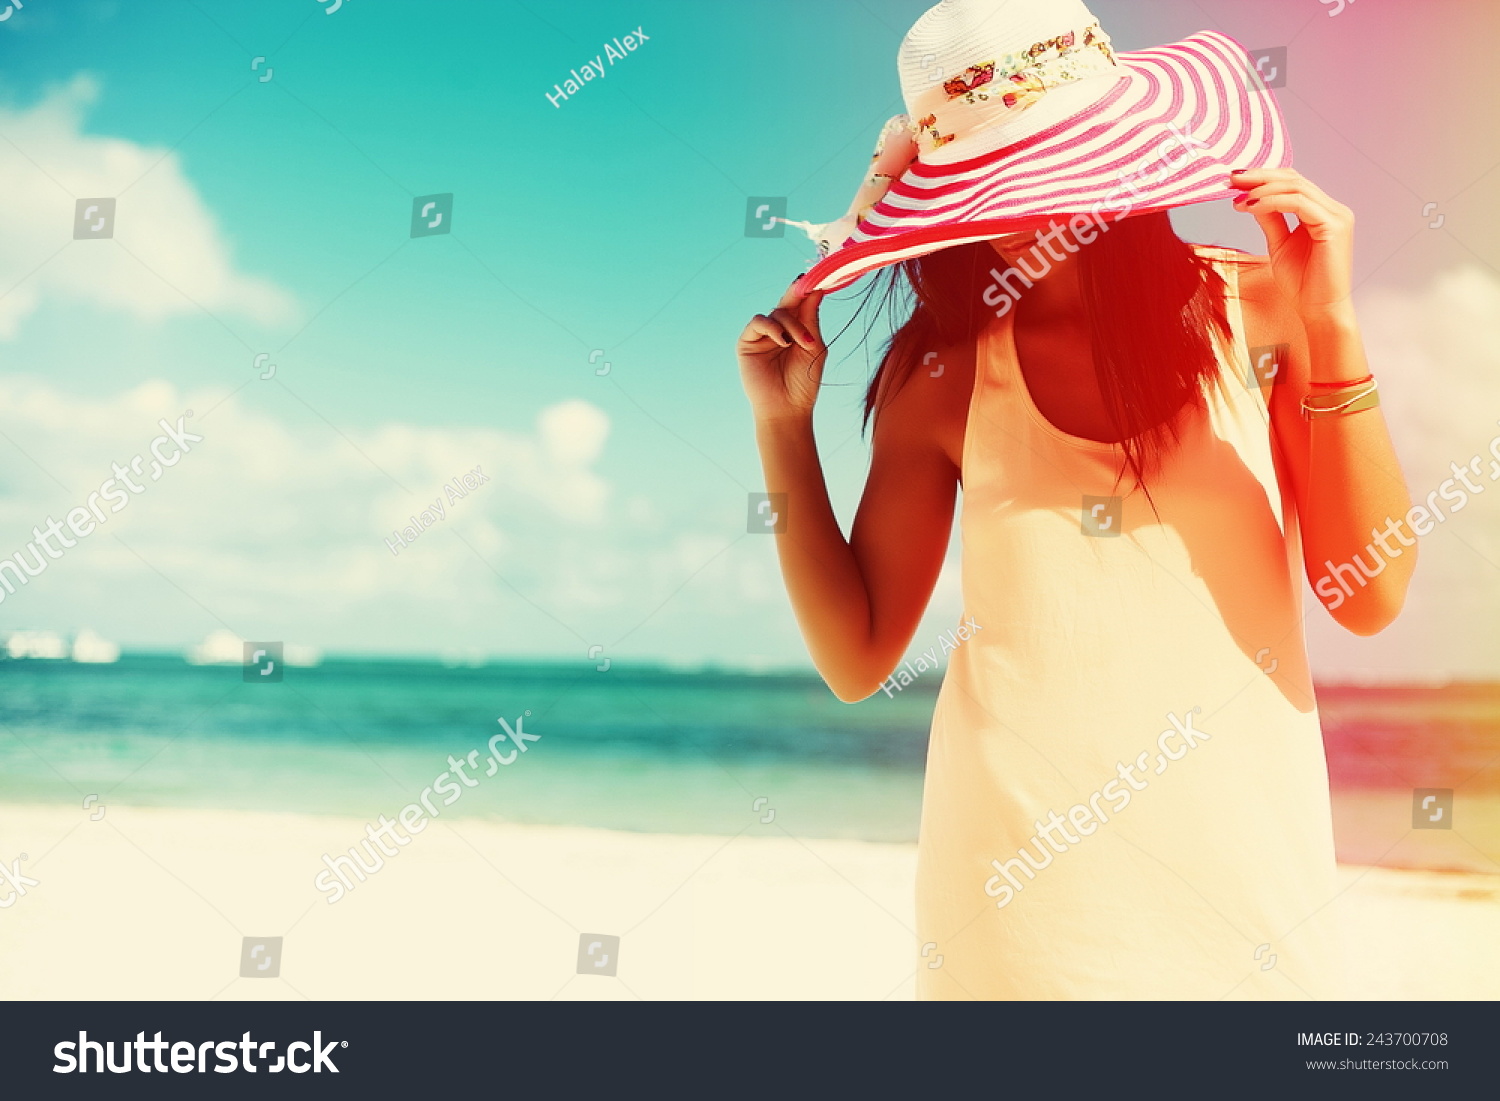 Hot beautiful woman in colorful sunhat and dress walking near beach ocean on hot summer day on white sand #243700708